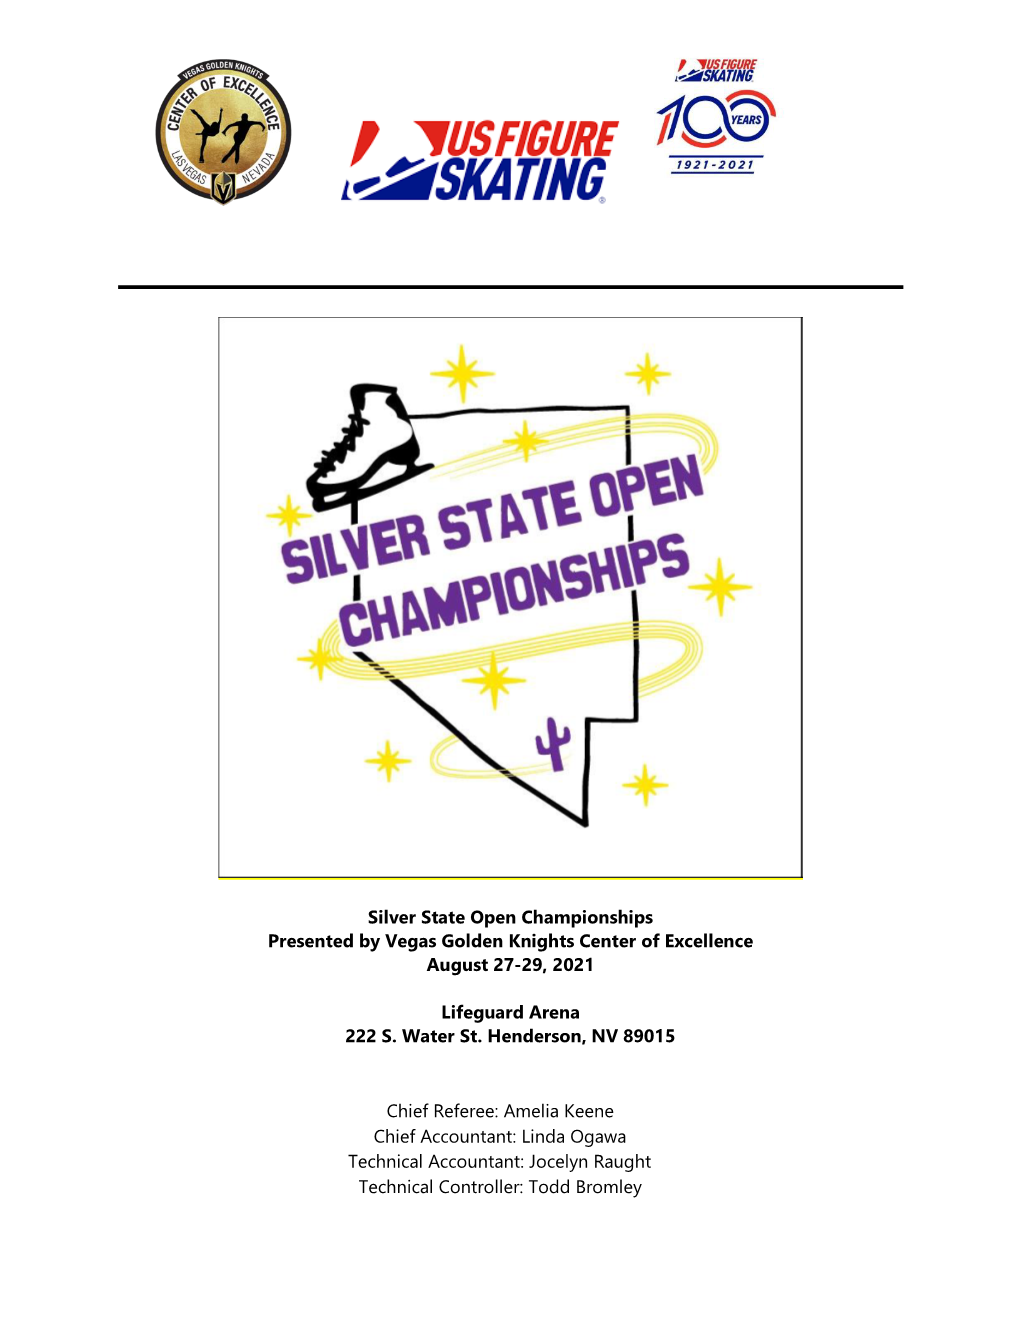 Silver State Open Championships Presented by Vegas Golden Knights Center of Excellence August 27-29, 2021